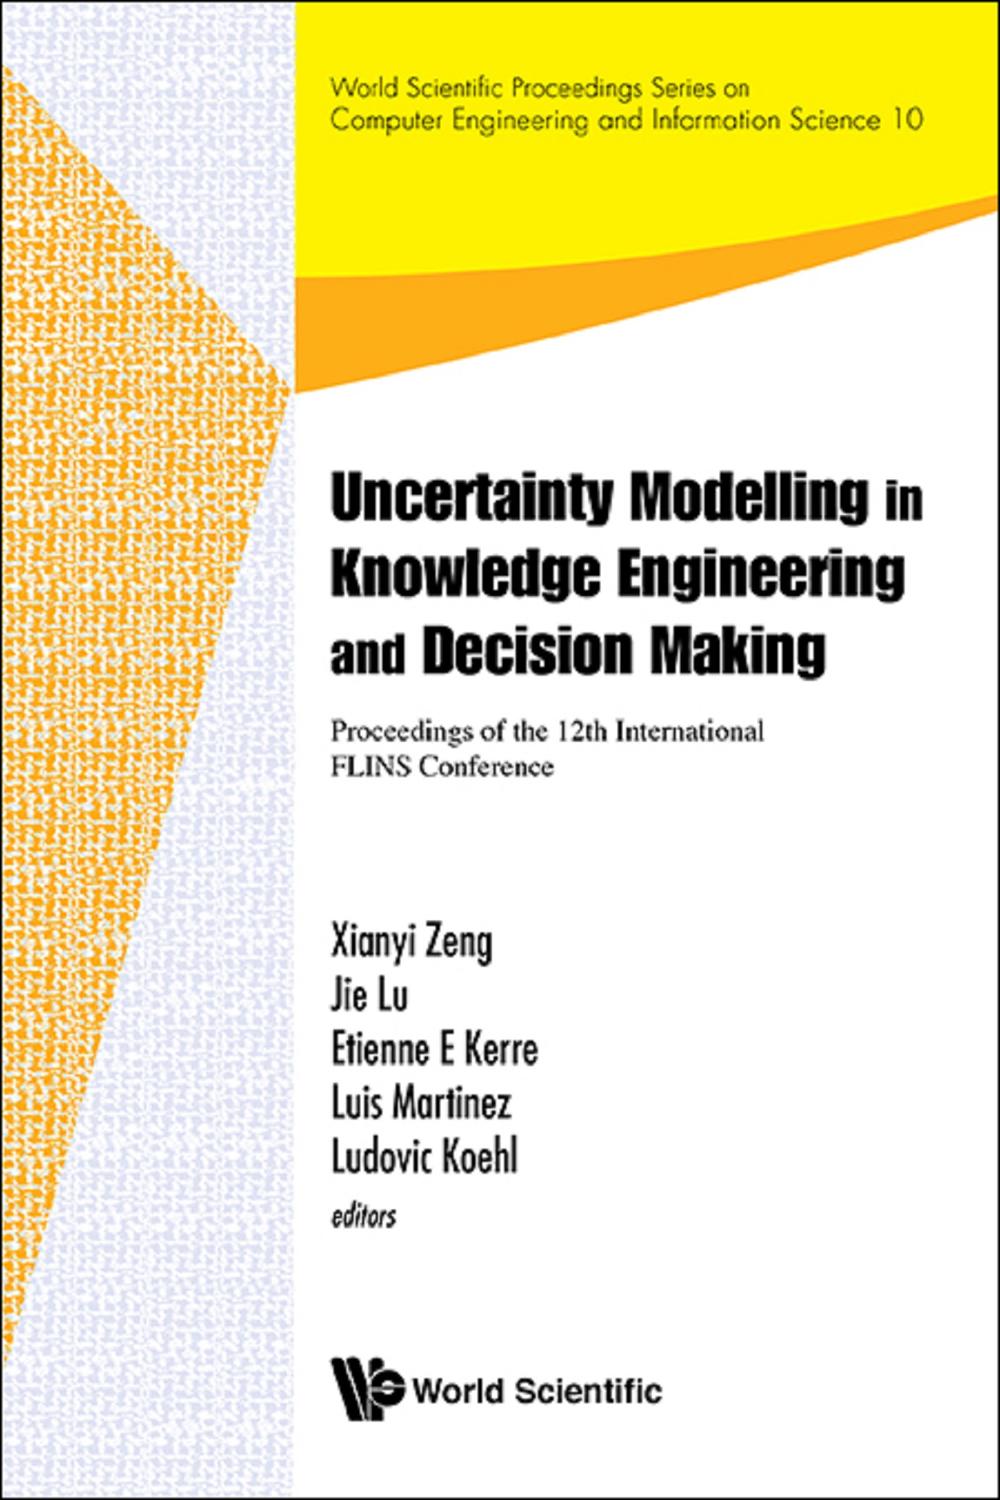 Uncertainty Modelling In Knowledge Engineering And Decision Making - Proceedings Of The 12th International Flins Conference (Flins 2016) - Xianyi Zeng, Jie Lu;Etienne E Kerre;Luis Martinez;Ludovic Koehl